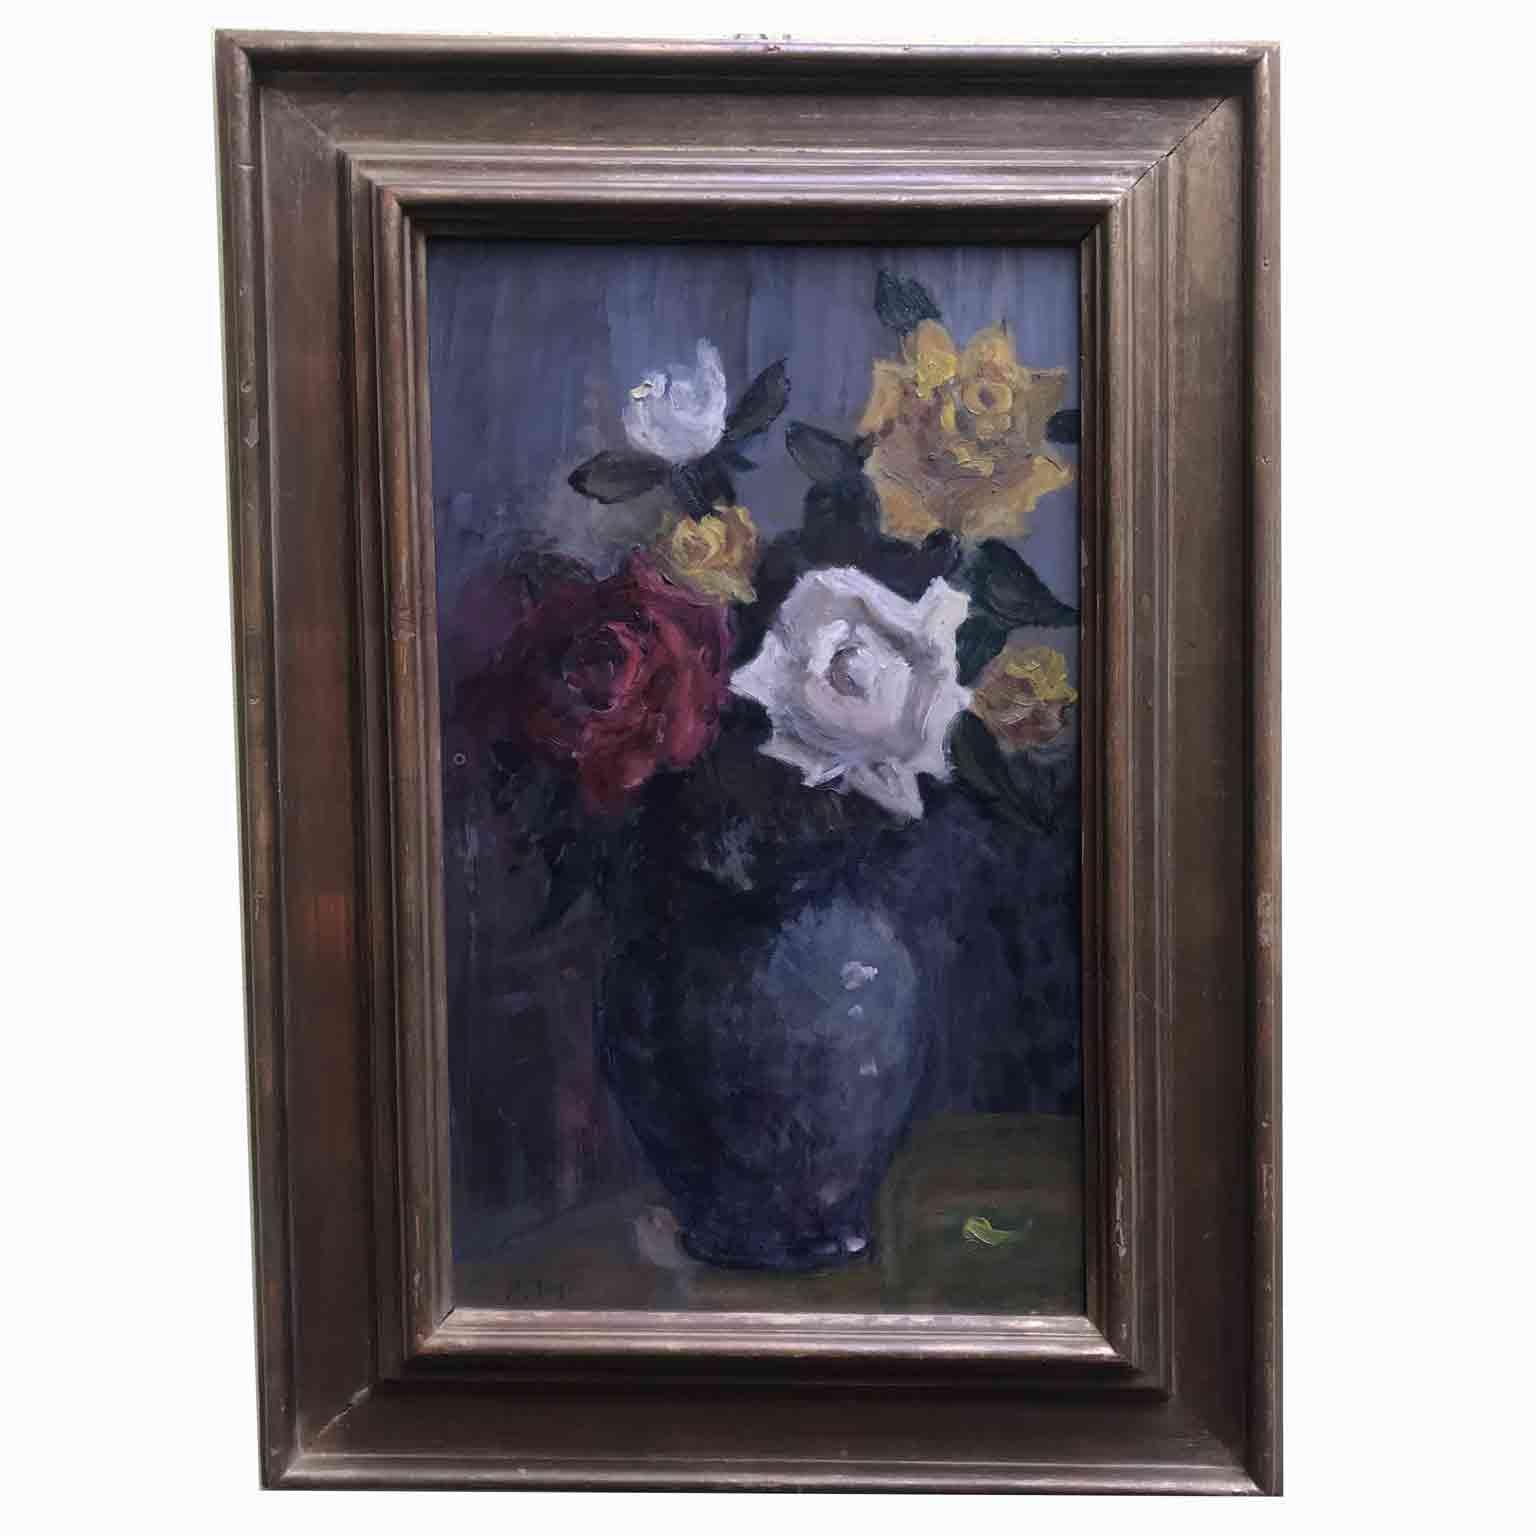 A flowers painting, an Italian polychrome roses composition set in a blue pottery vase, a 20th century Italian still-life of flowers, oil painted on Masonite panel, measuring 56,5 cm by 35, signed lower left A.Tosi by the Italian Lombard painter